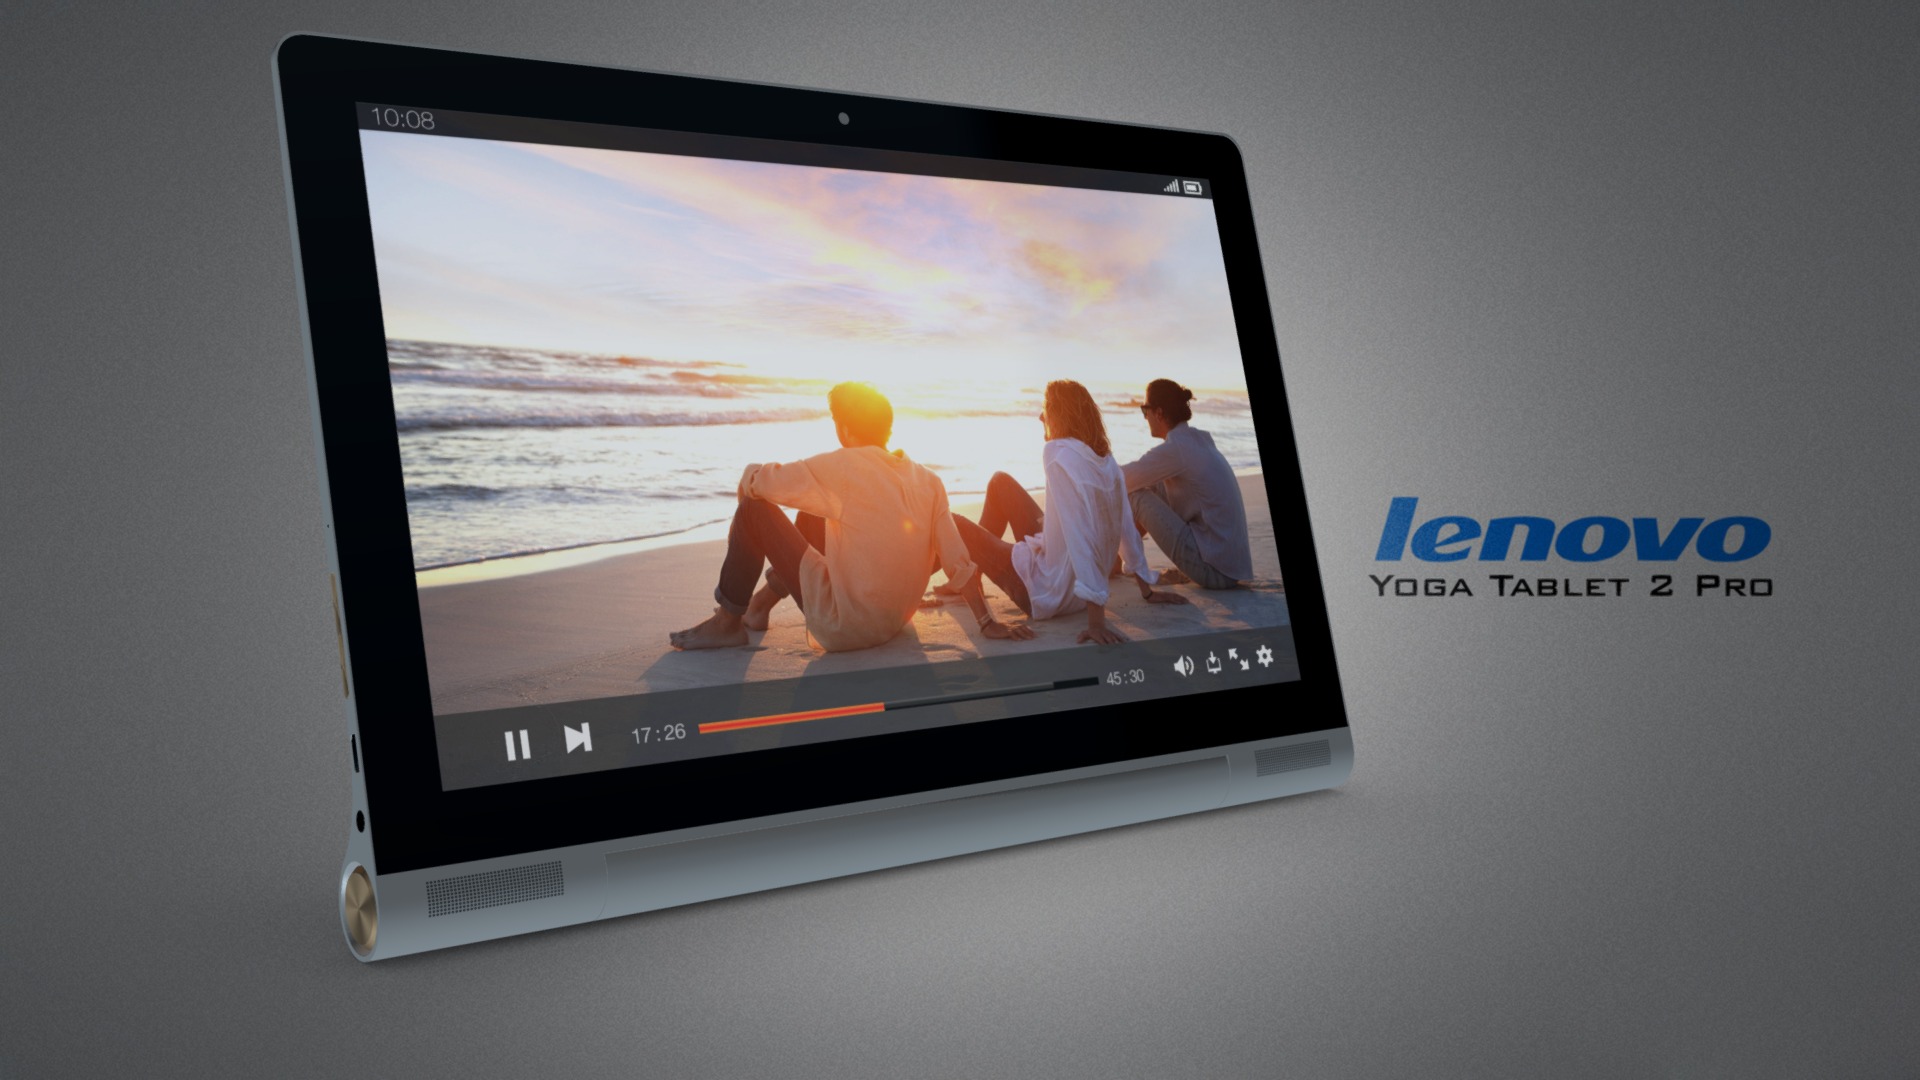 3D model Lenovo Yoga Tablet 2 Pro - This is a 3D model of the Lenovo Yoga Tablet 2 Pro. The 3D model is about a tablet showing a group of people sitting on a bench.